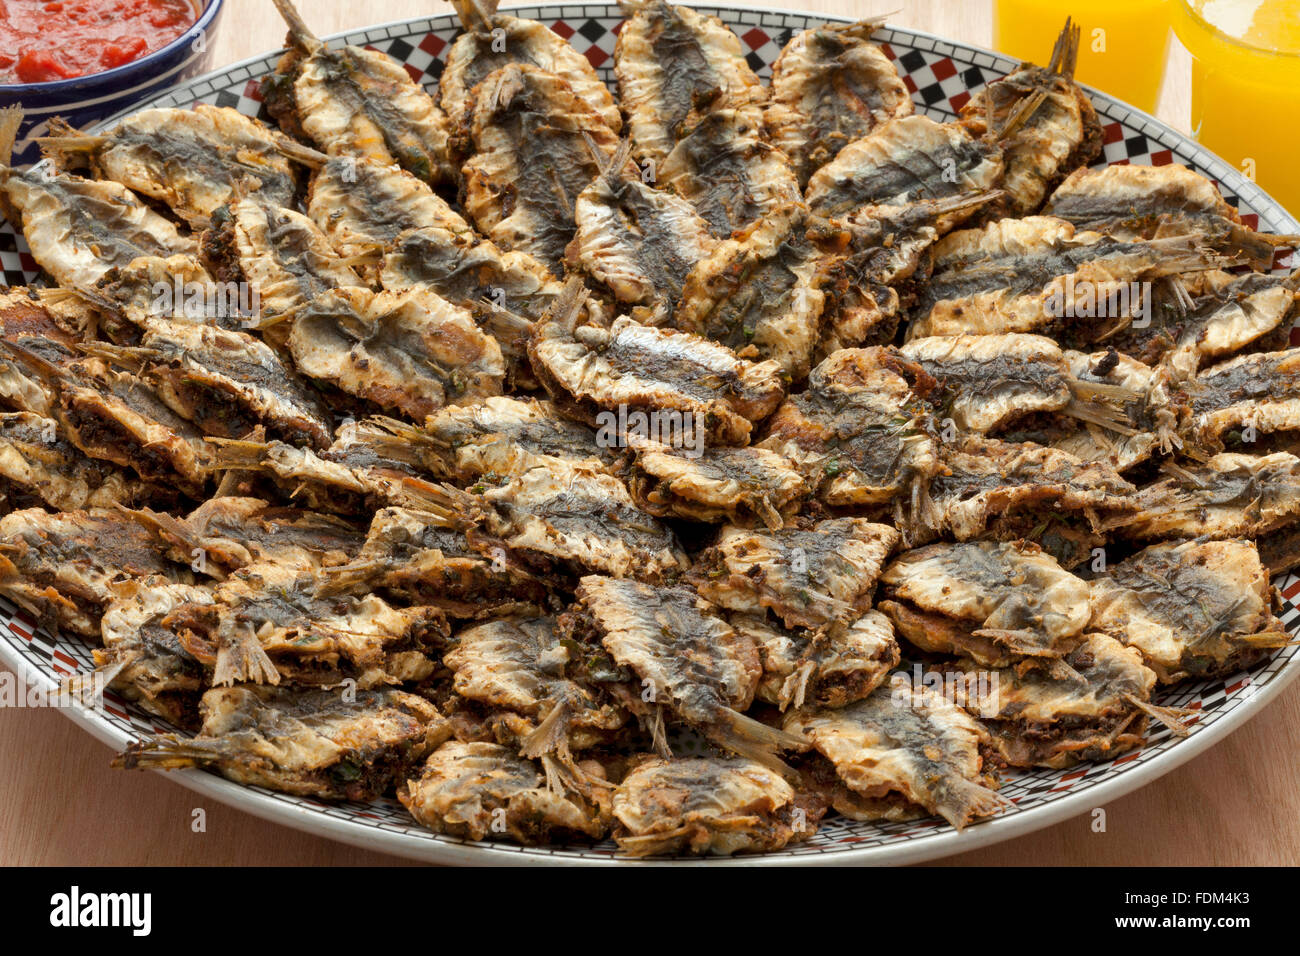 Dish with Moroccan fried stuffed sardines close up Stock Photo